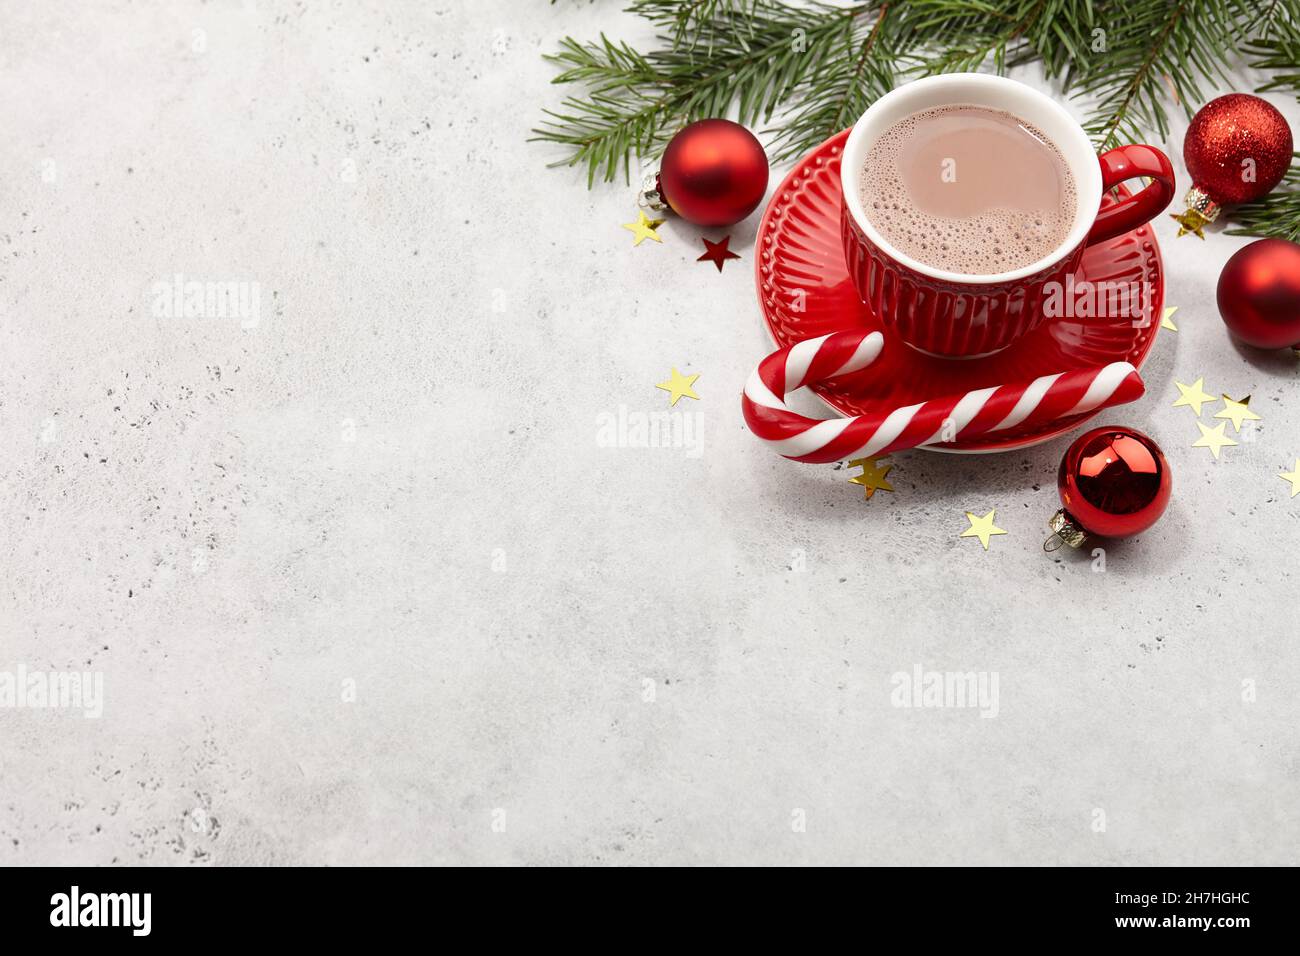 Red cup of hot chocolate drink and christmas decorations Stock Photo